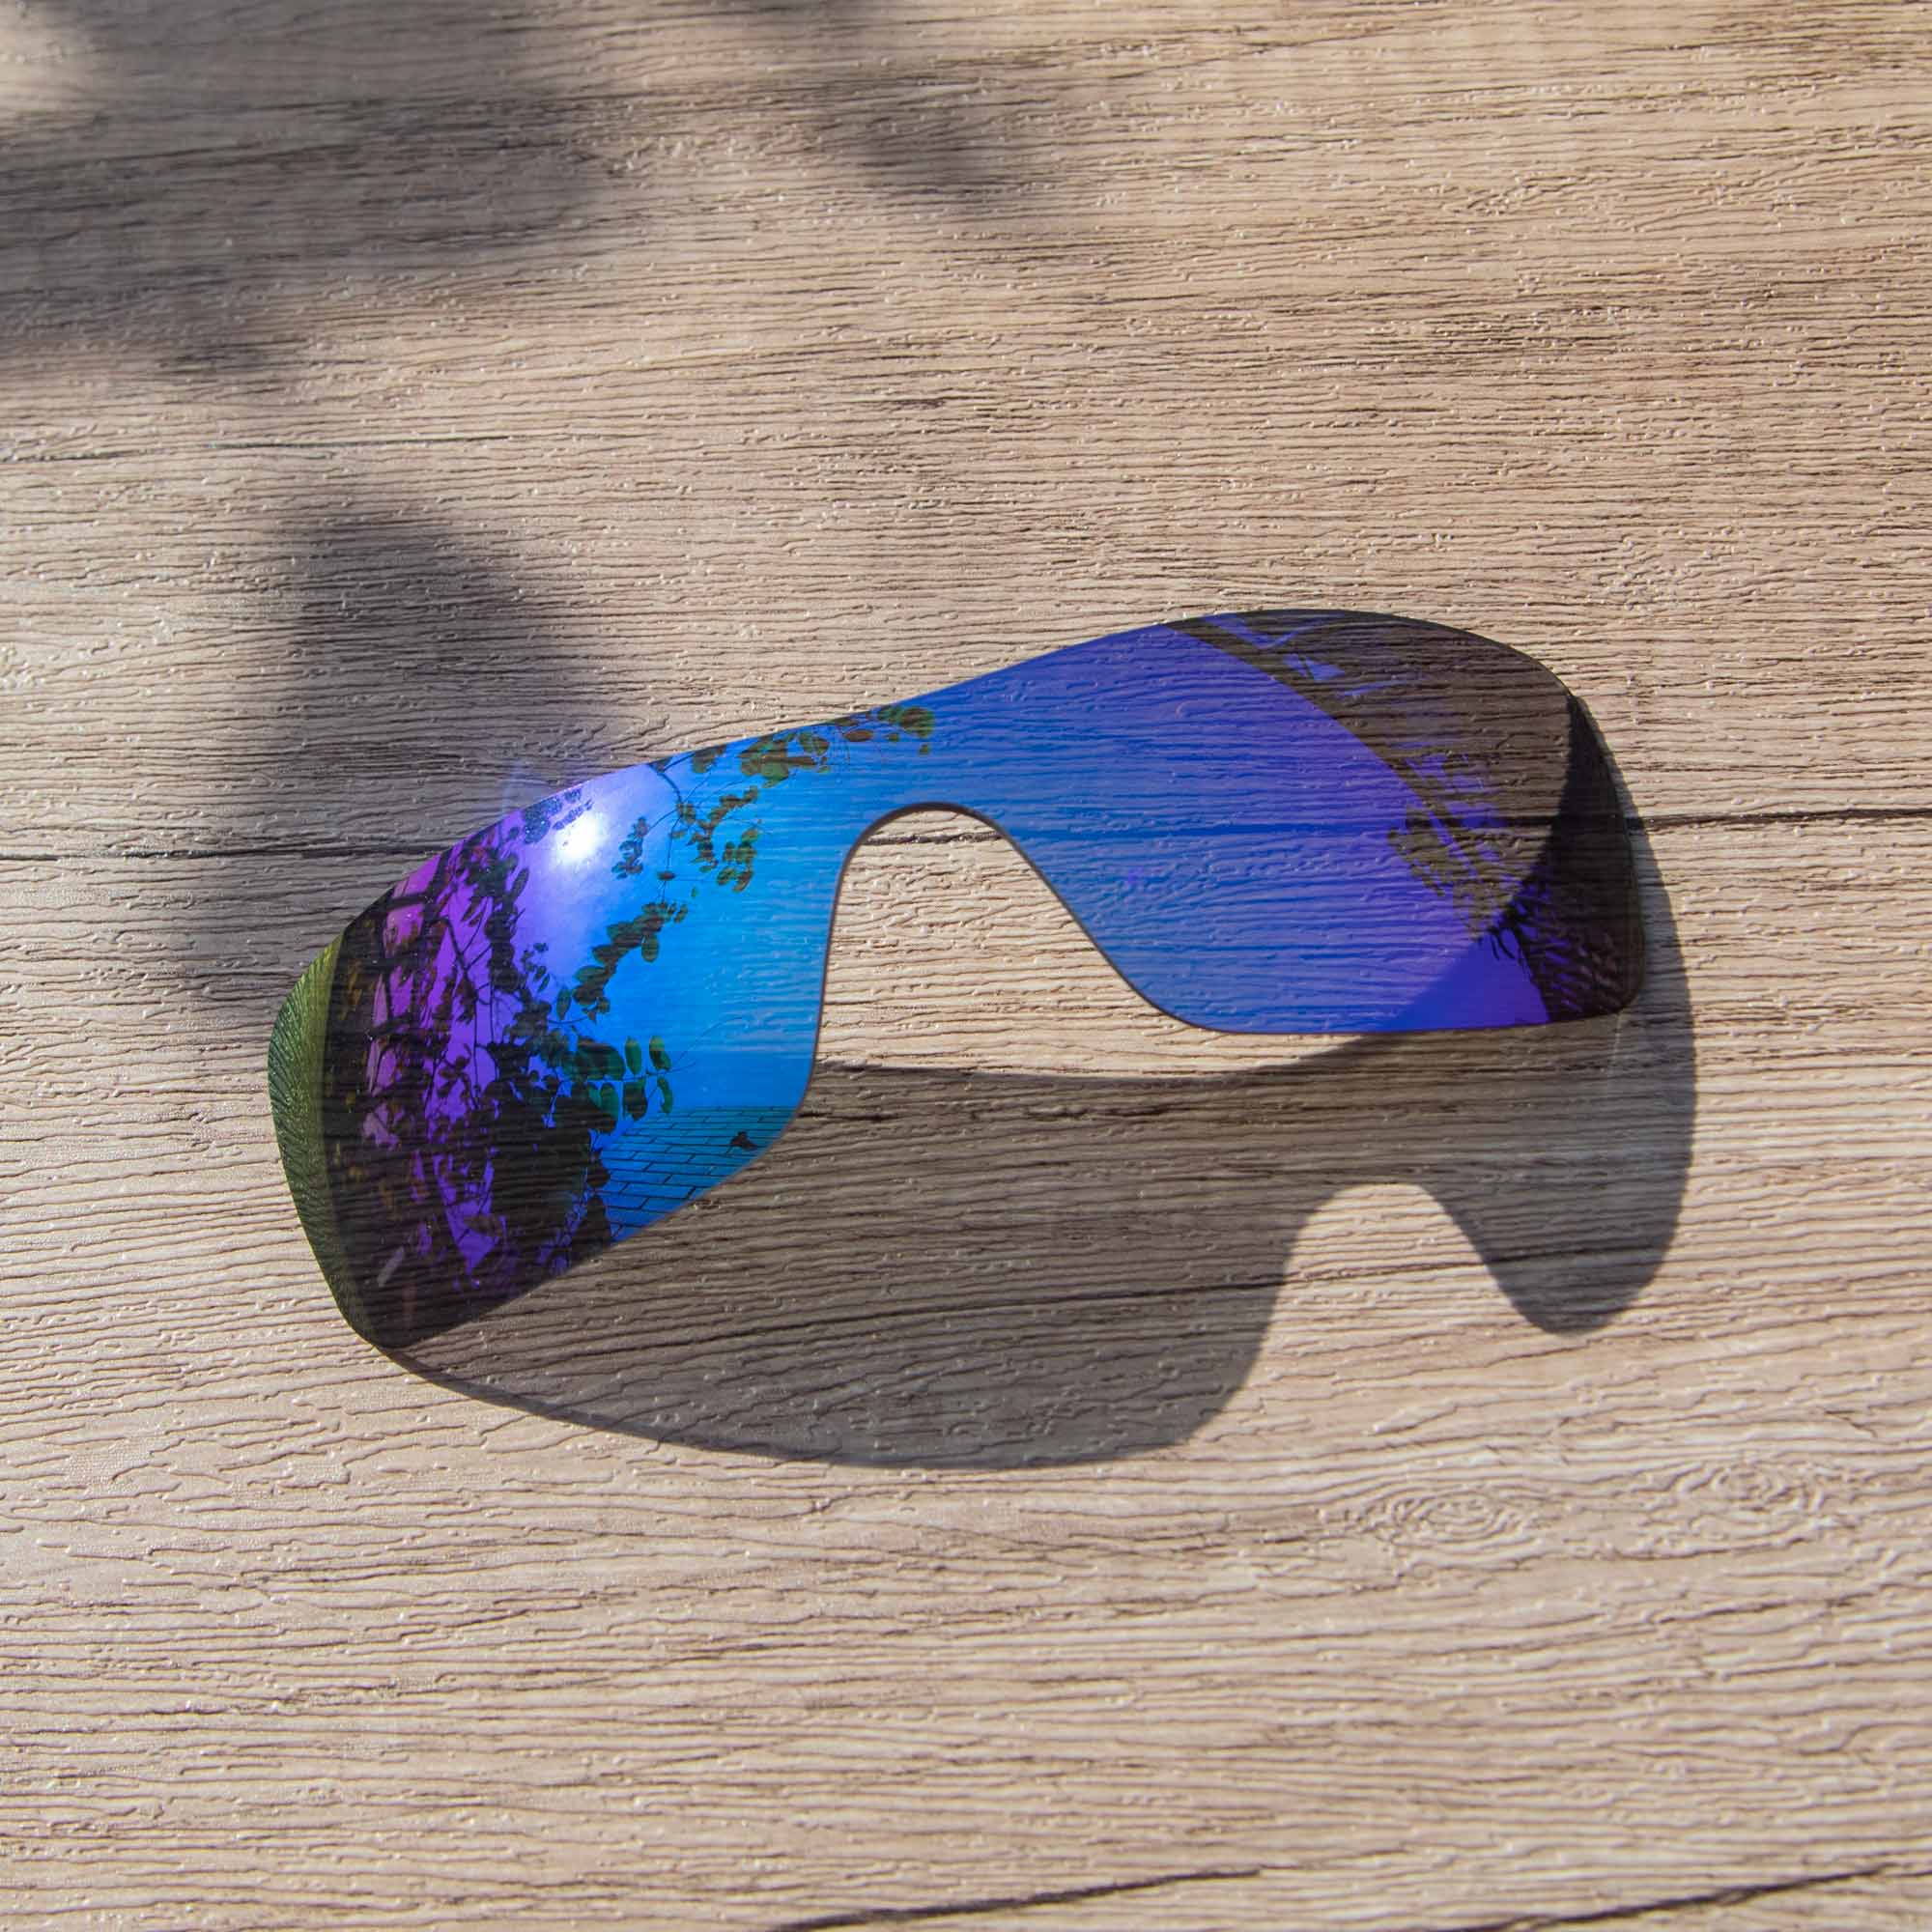 Walleva Ice Blue Polarized Replacement Lenses for Oakley Batwolf Sunglasses - image 4 of 7